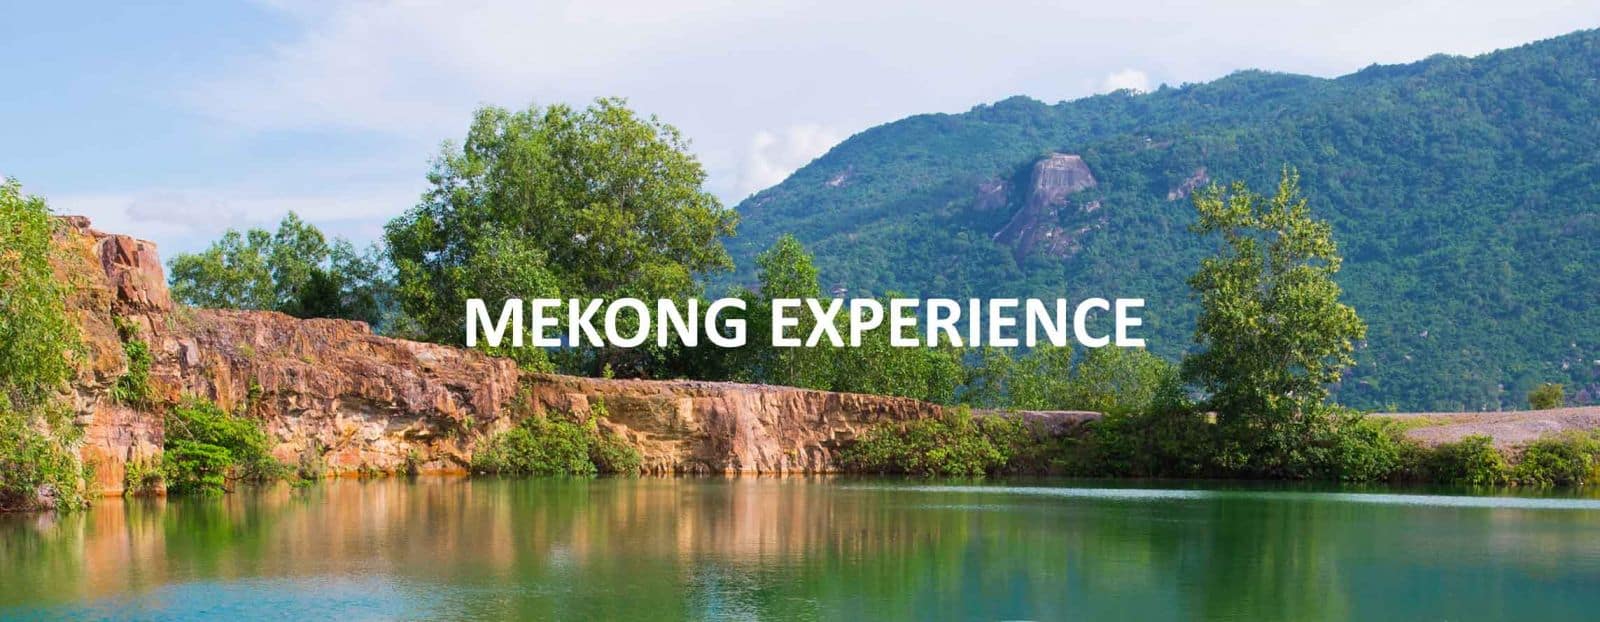 Mekong Experience Travel | Can Tho Tours, Mekong Eco Tours, Mekong Delta Tours